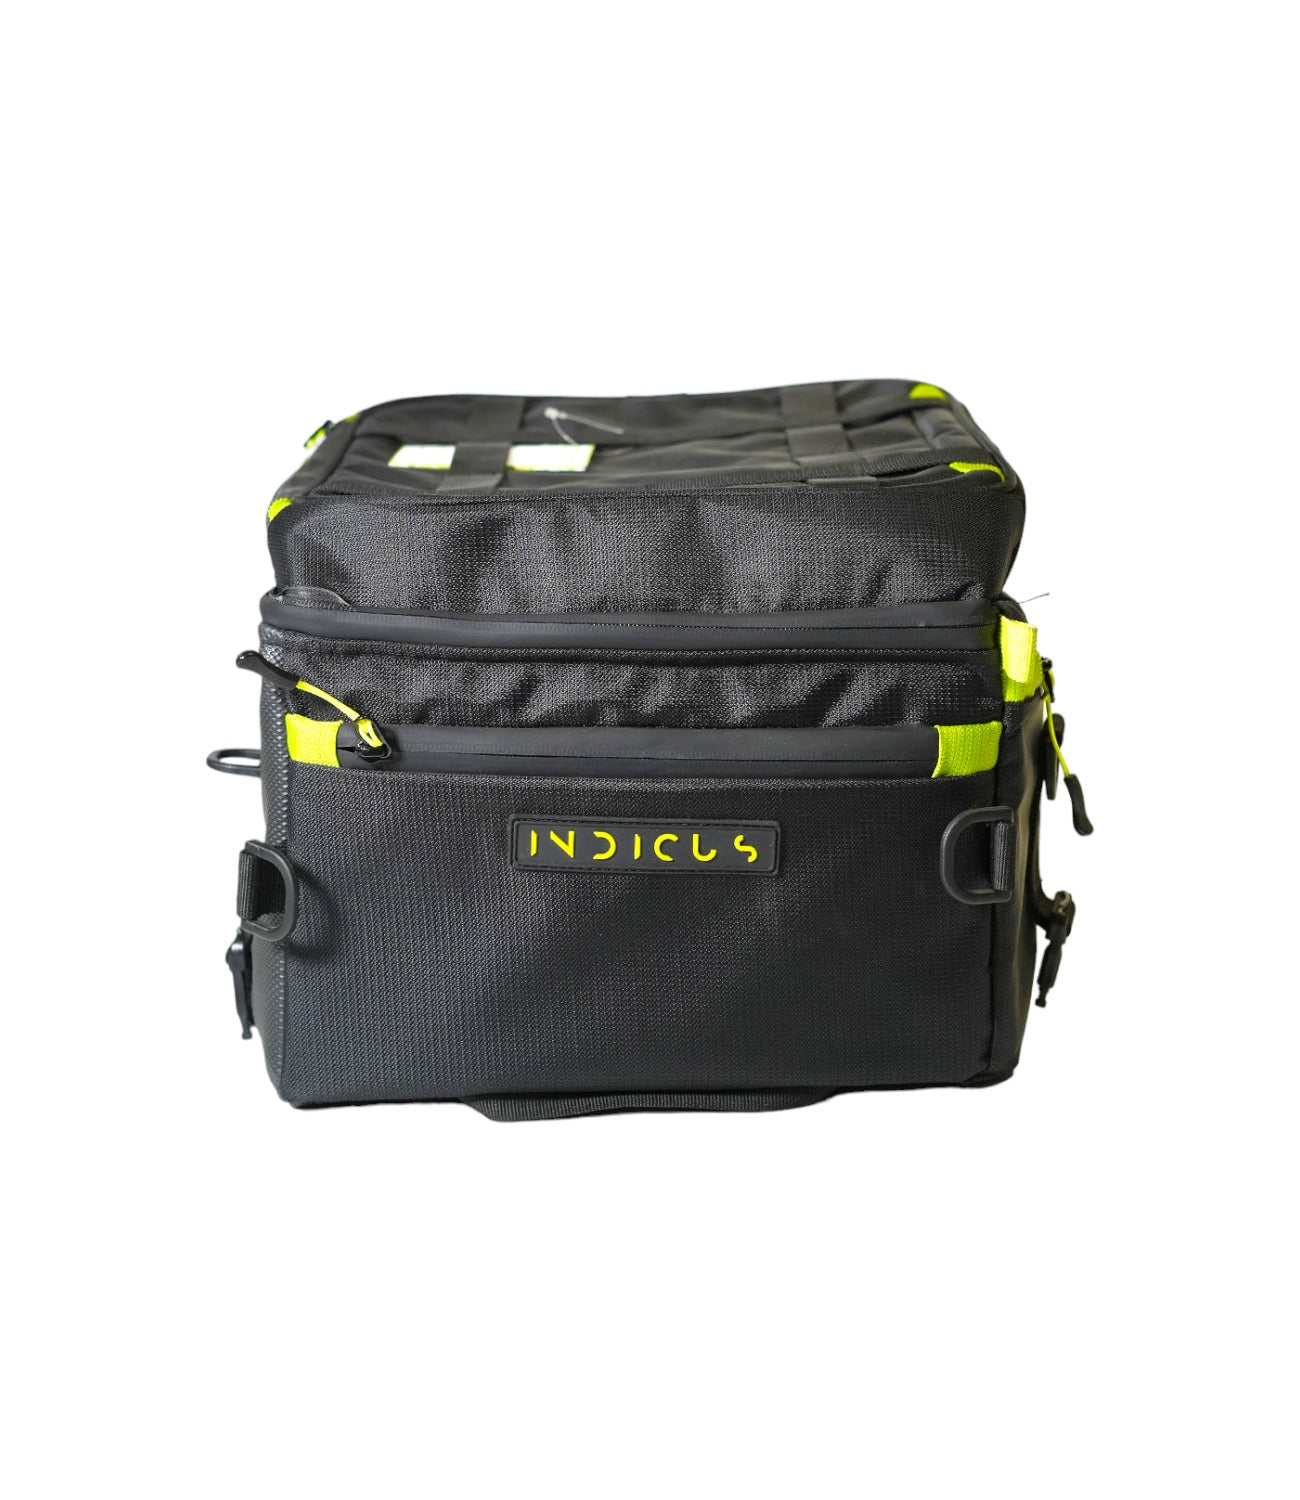 Nomad Gears Indicus Motorcycle Tail Bag